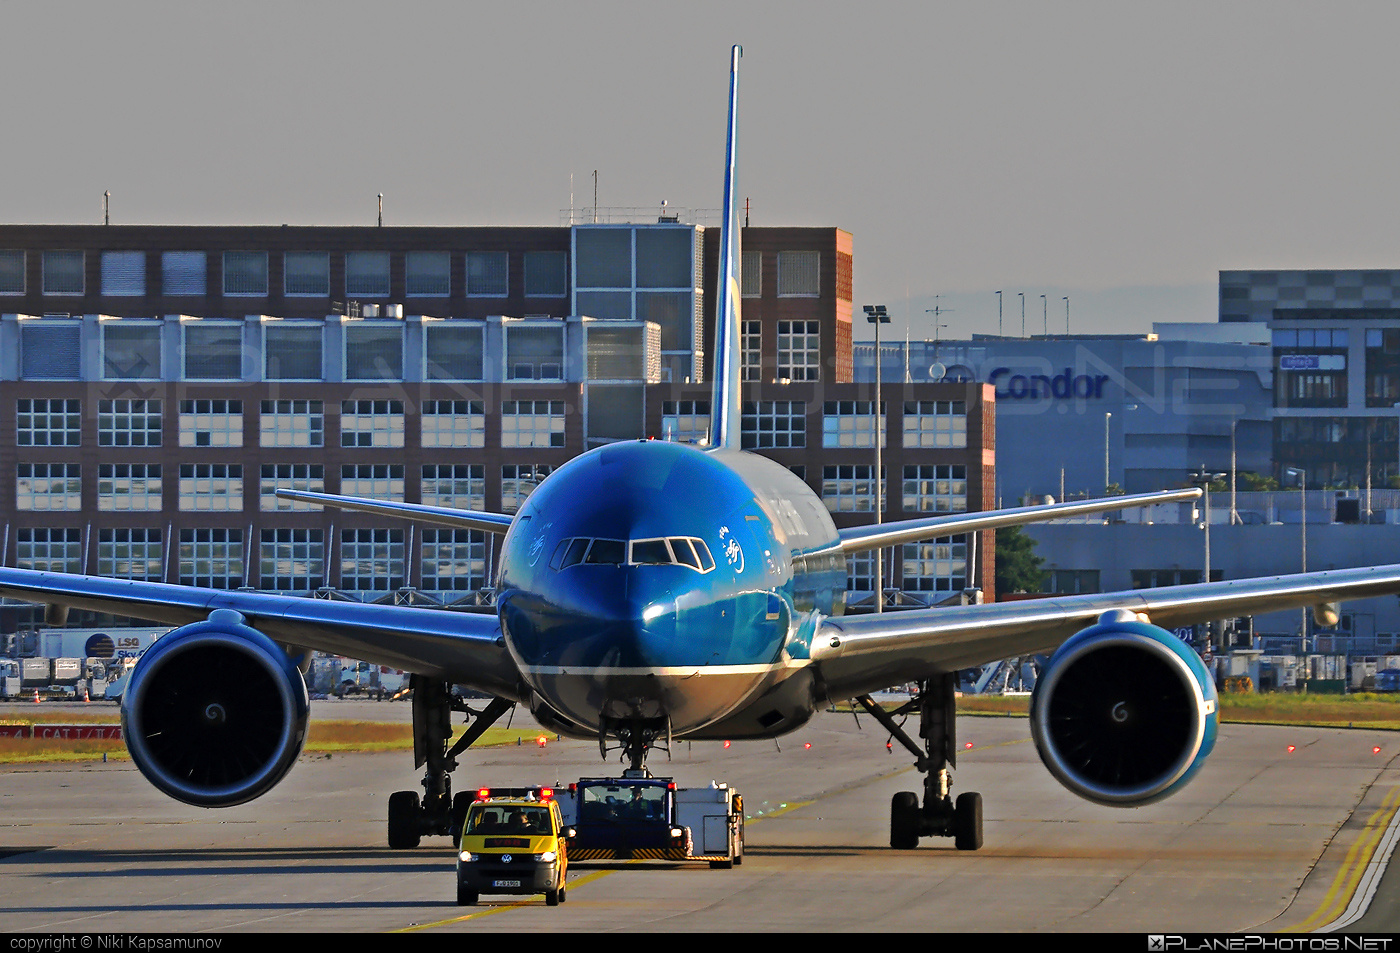 Boeing 777-200ER - VN-A150 operated by Vietnam Airlines #b777 #b777er #boeing #boeing777 #tripleseven